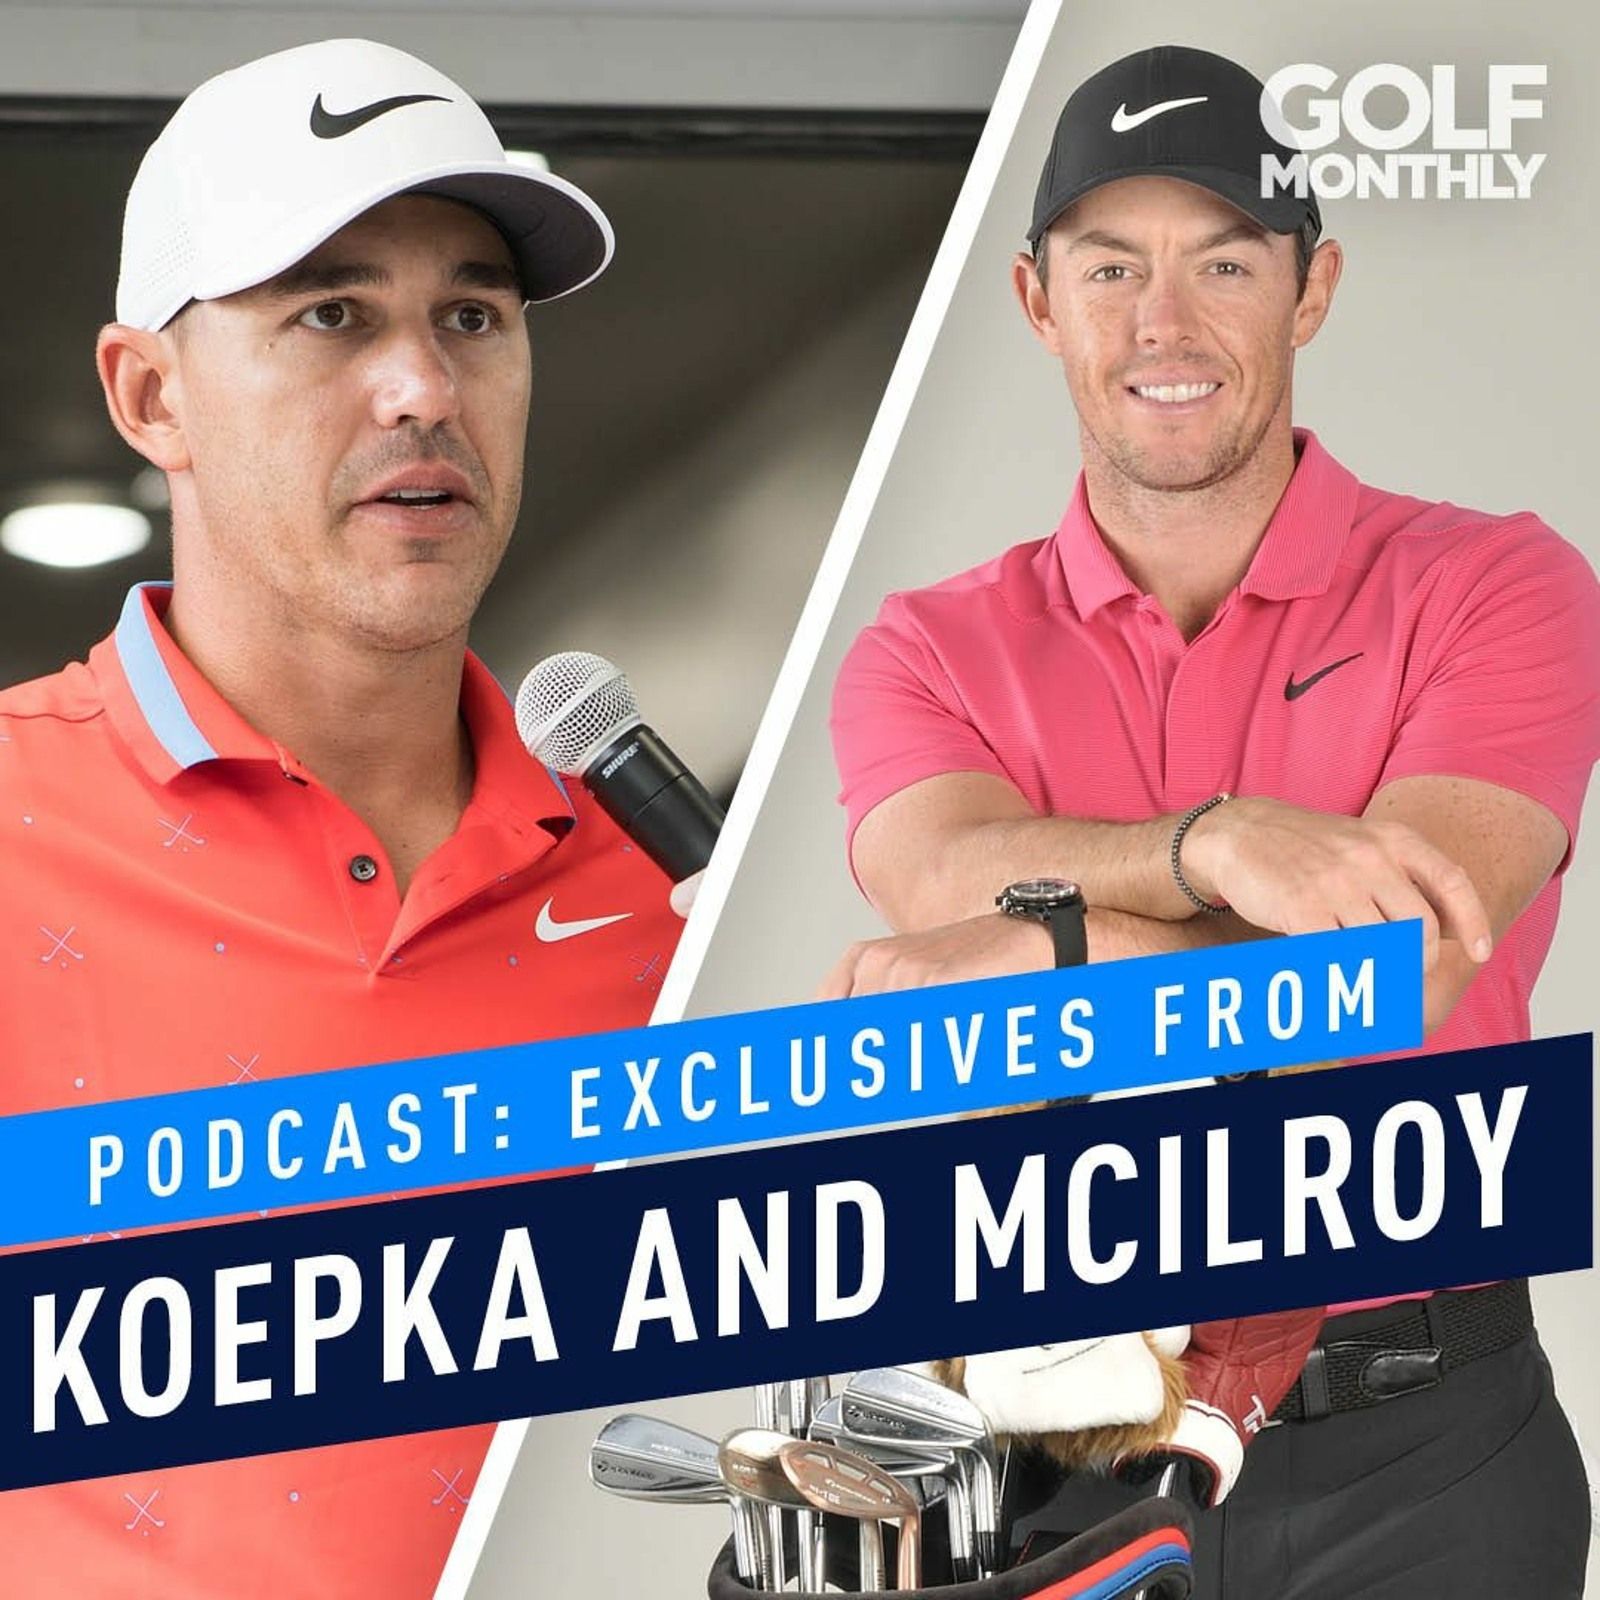 Brooks Koepka and Rory McIlroy Exclusive Interviews